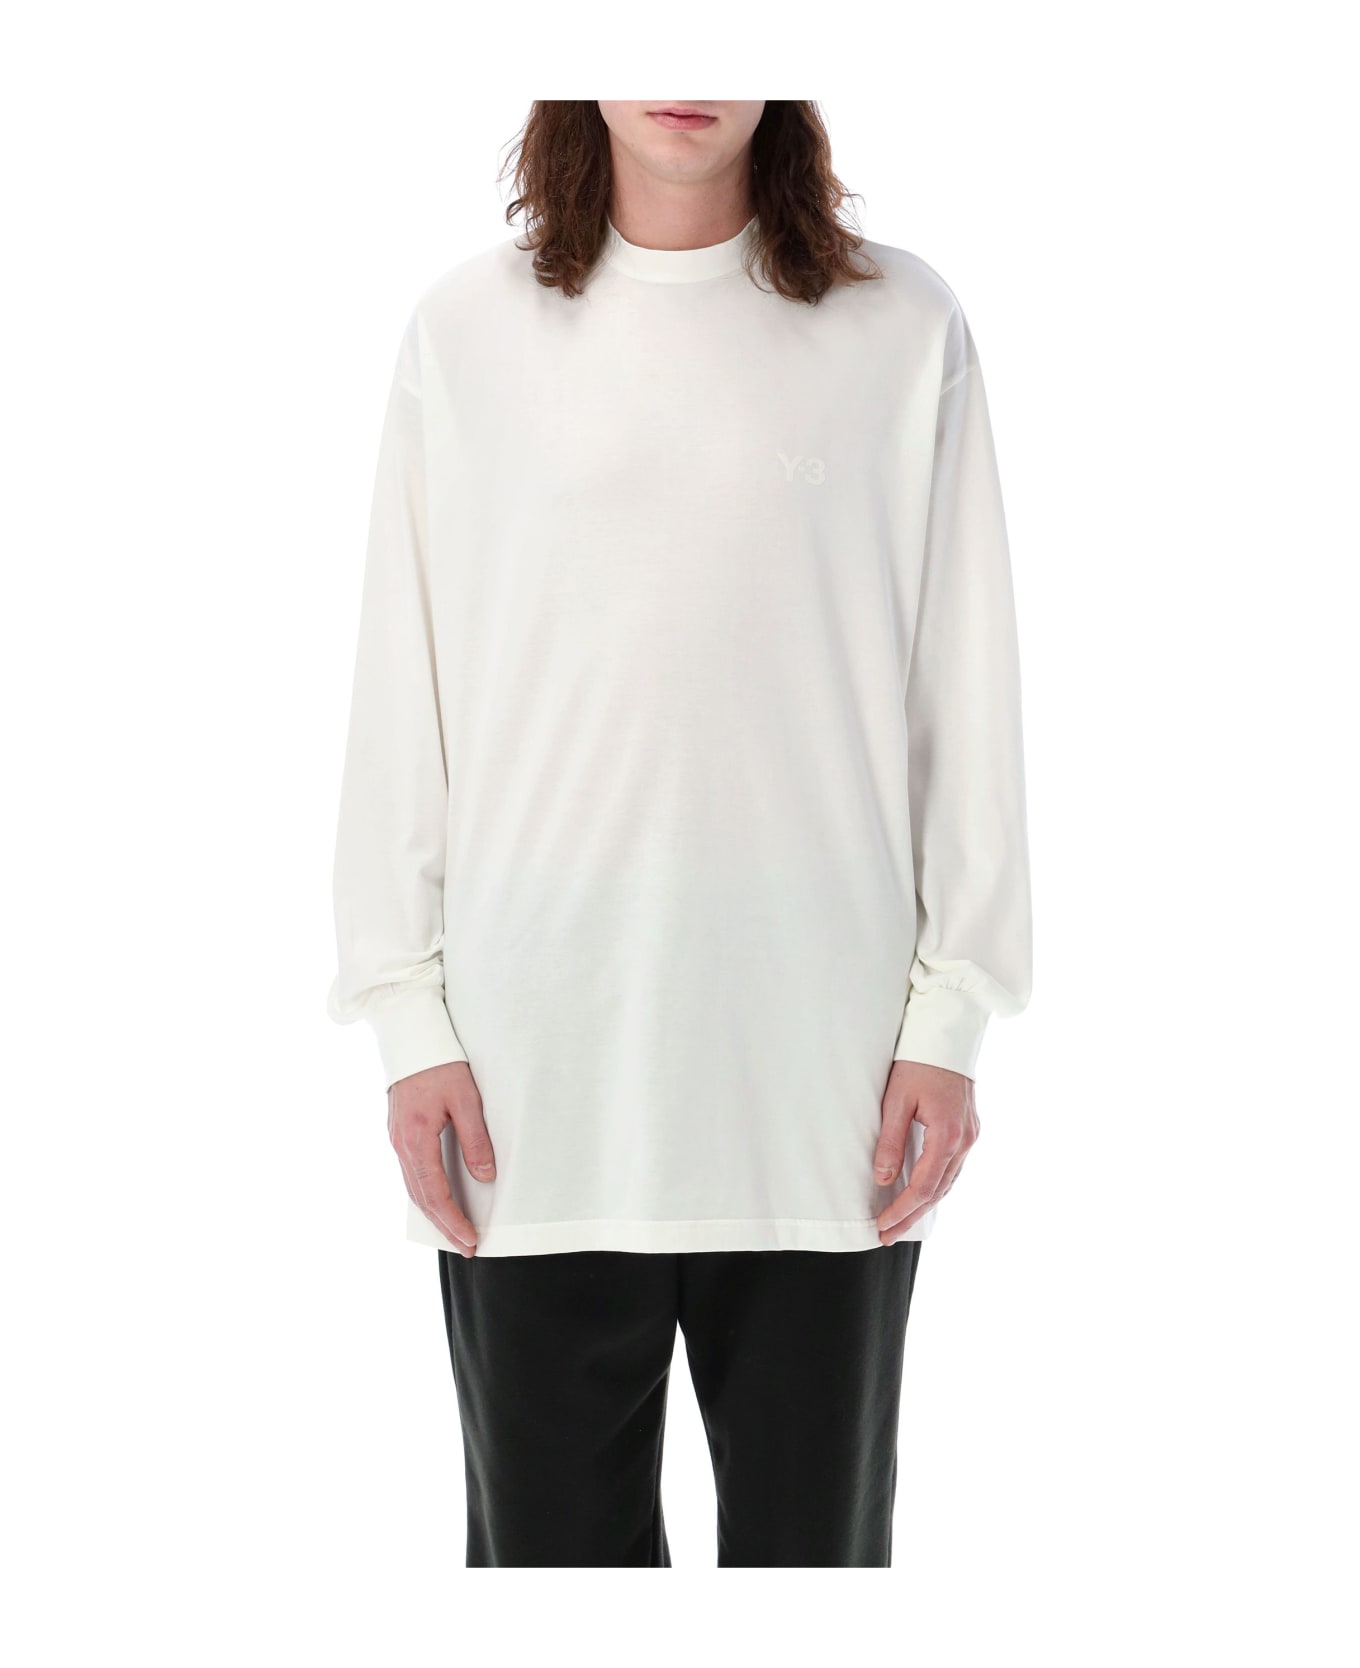 Y-3 Mock Neck Long Sleeves T-shirt - WHITE Tシャツ